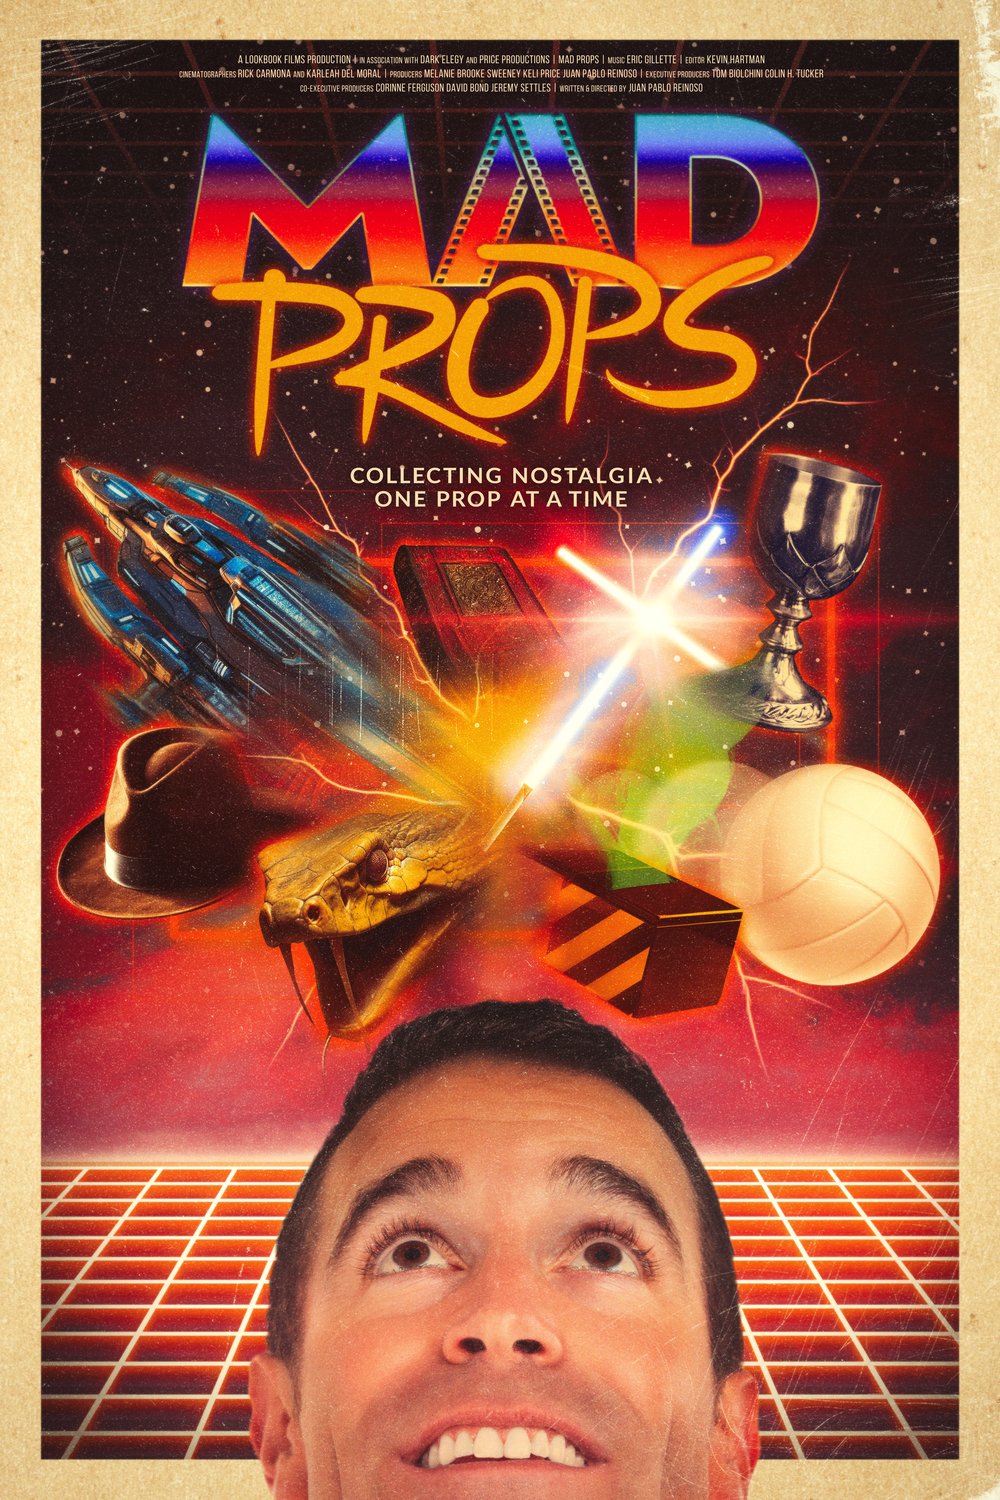 Poster of the movie Mad Props